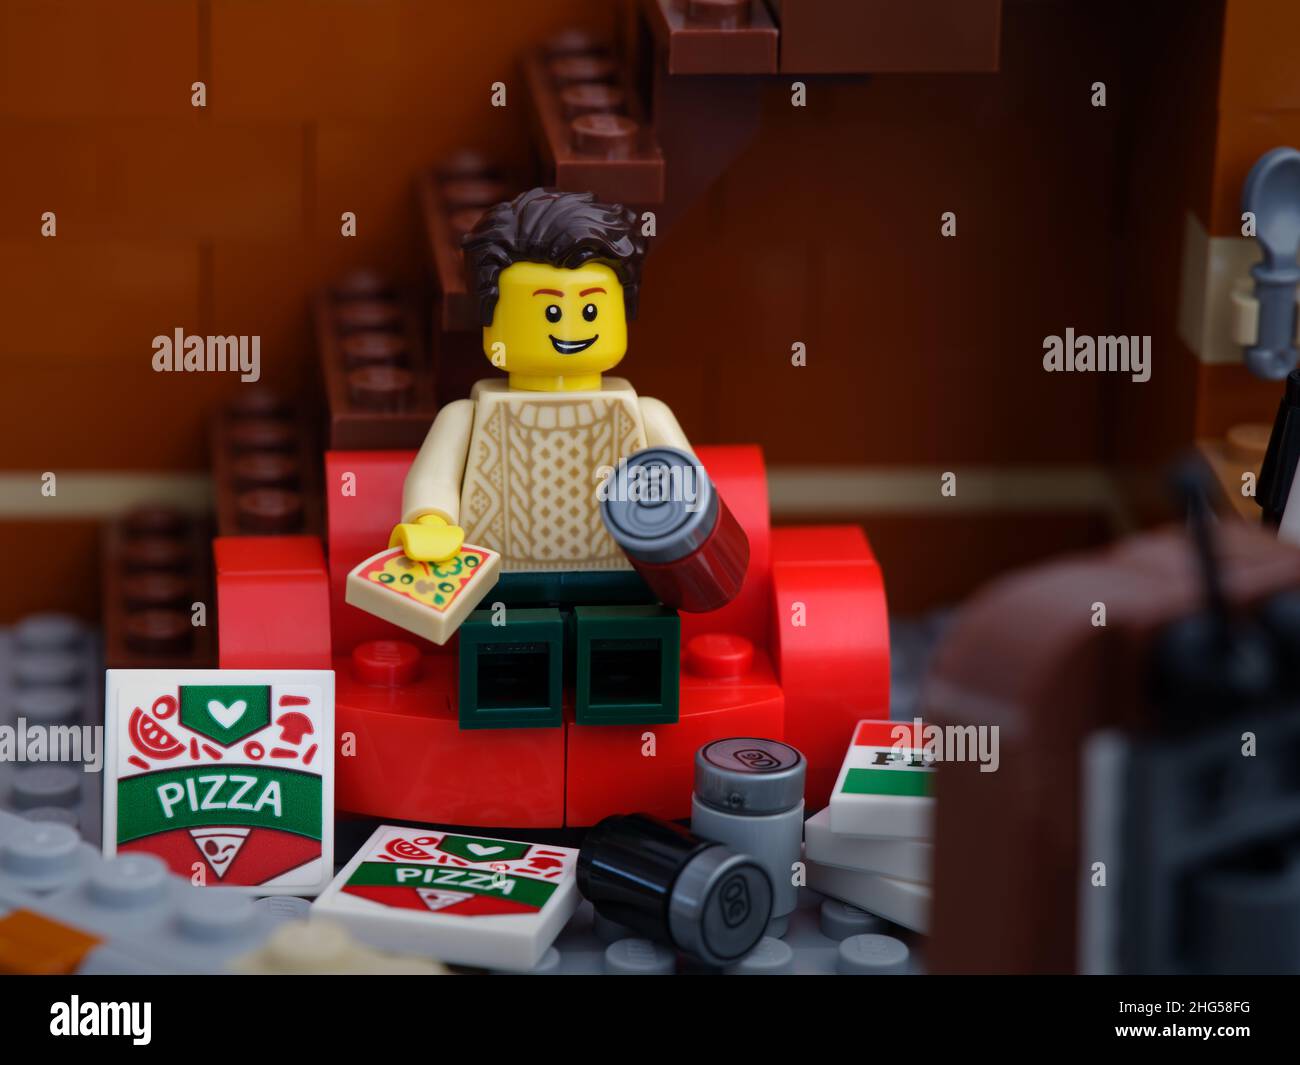 Tambov, Russian Federation - January 03, 2022 A Lego man sitting on a red couch eating a pizza and watching television with pizza boxes and soda cans Stock Photo